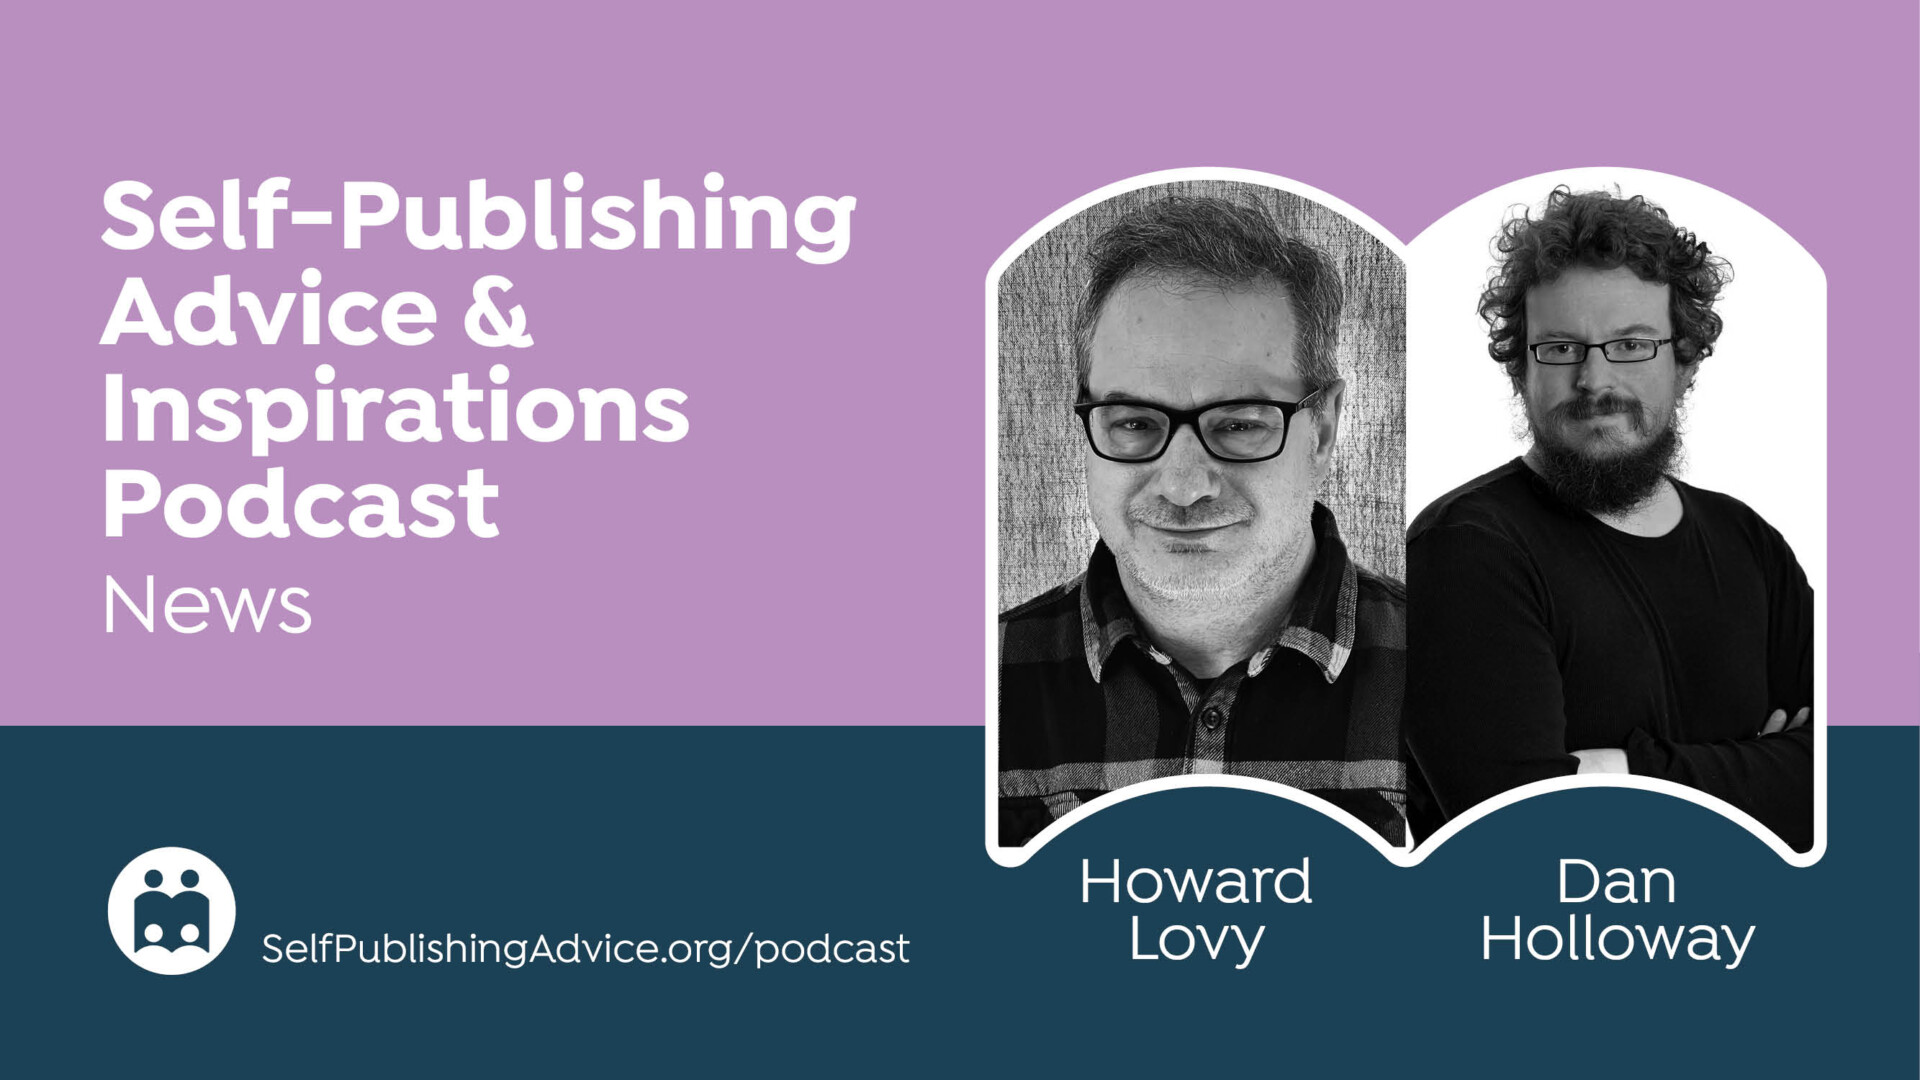 Experiments With Midjourney And ChatGPT: Does AI Enhance Or Replace Creativity? Self-Publishing News Podcast With Dan Holloway And Howard Lovy